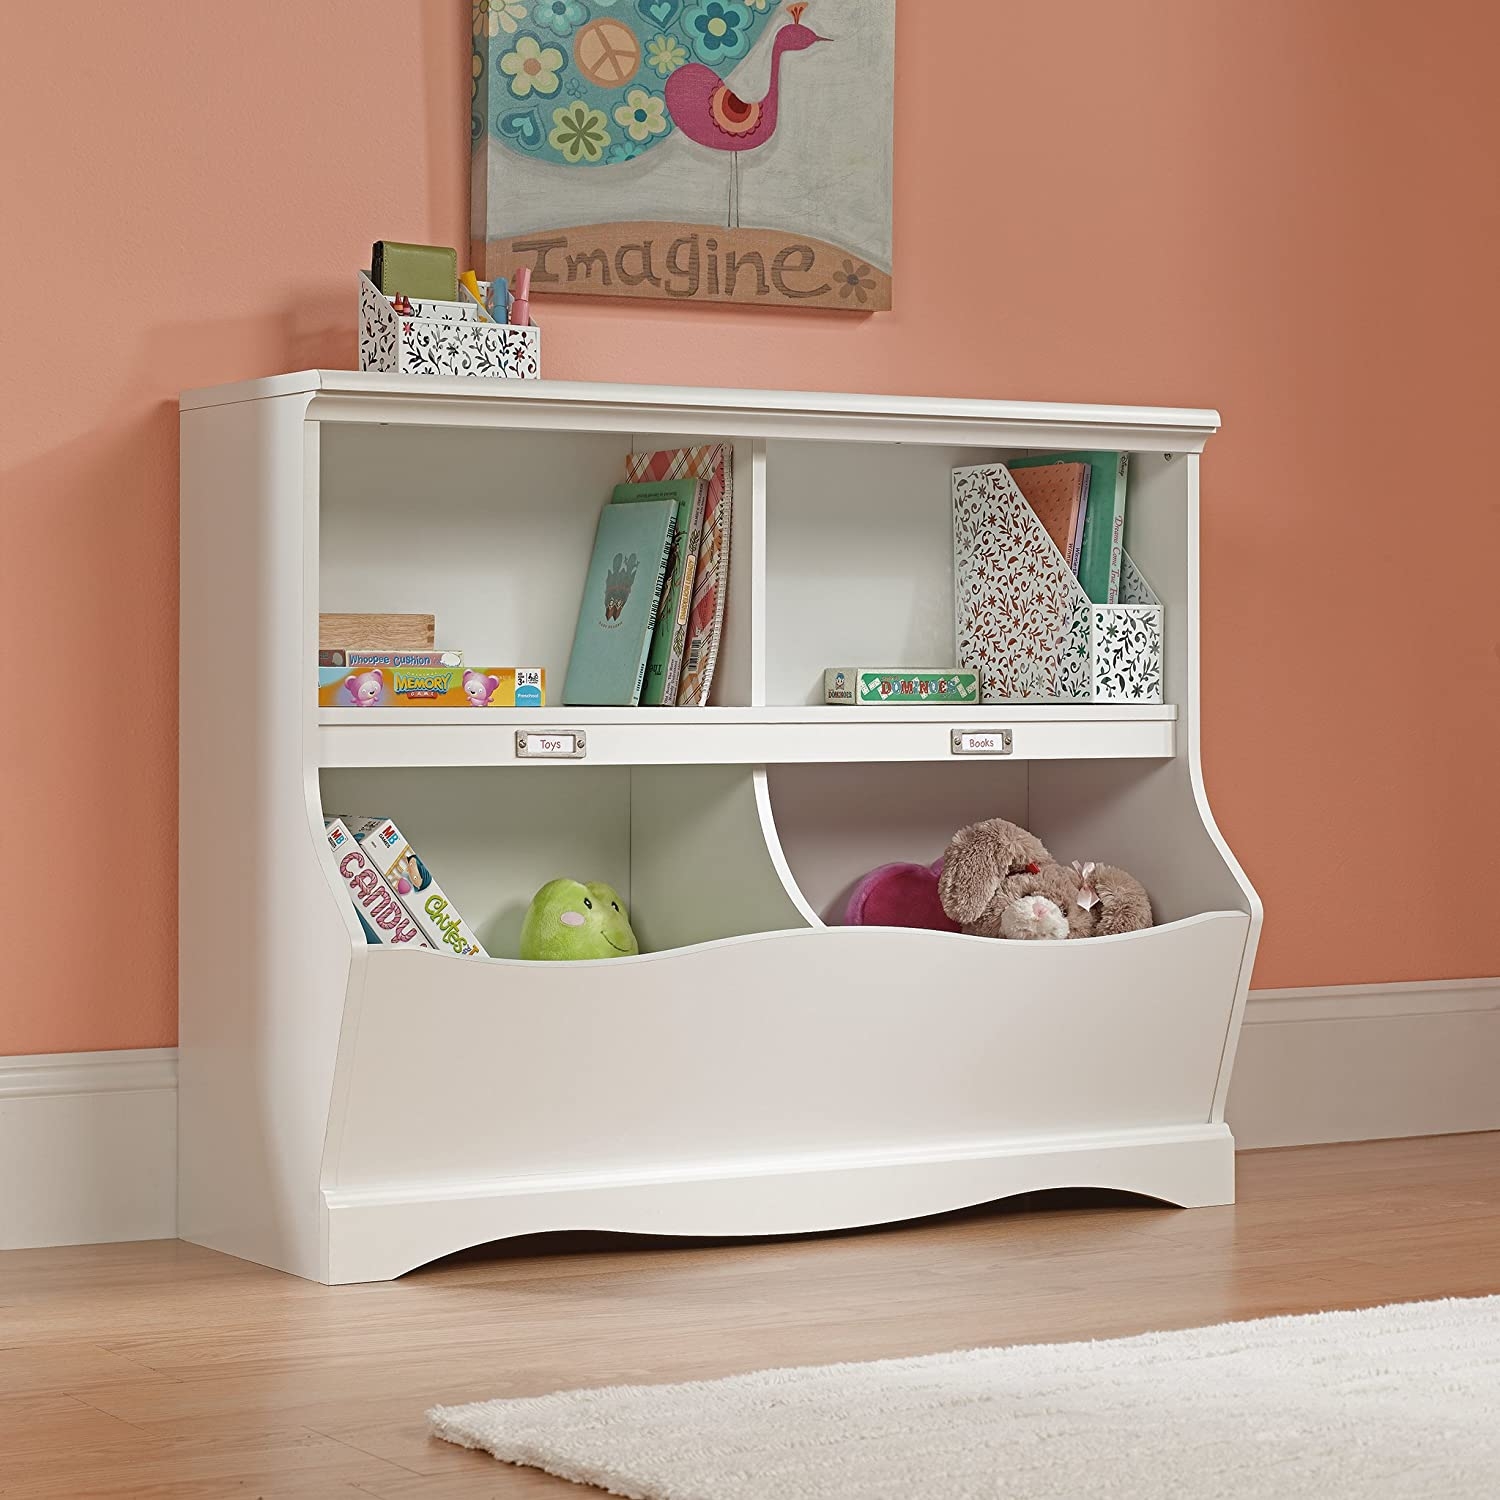 I love this idea toy cubby with book shelves think